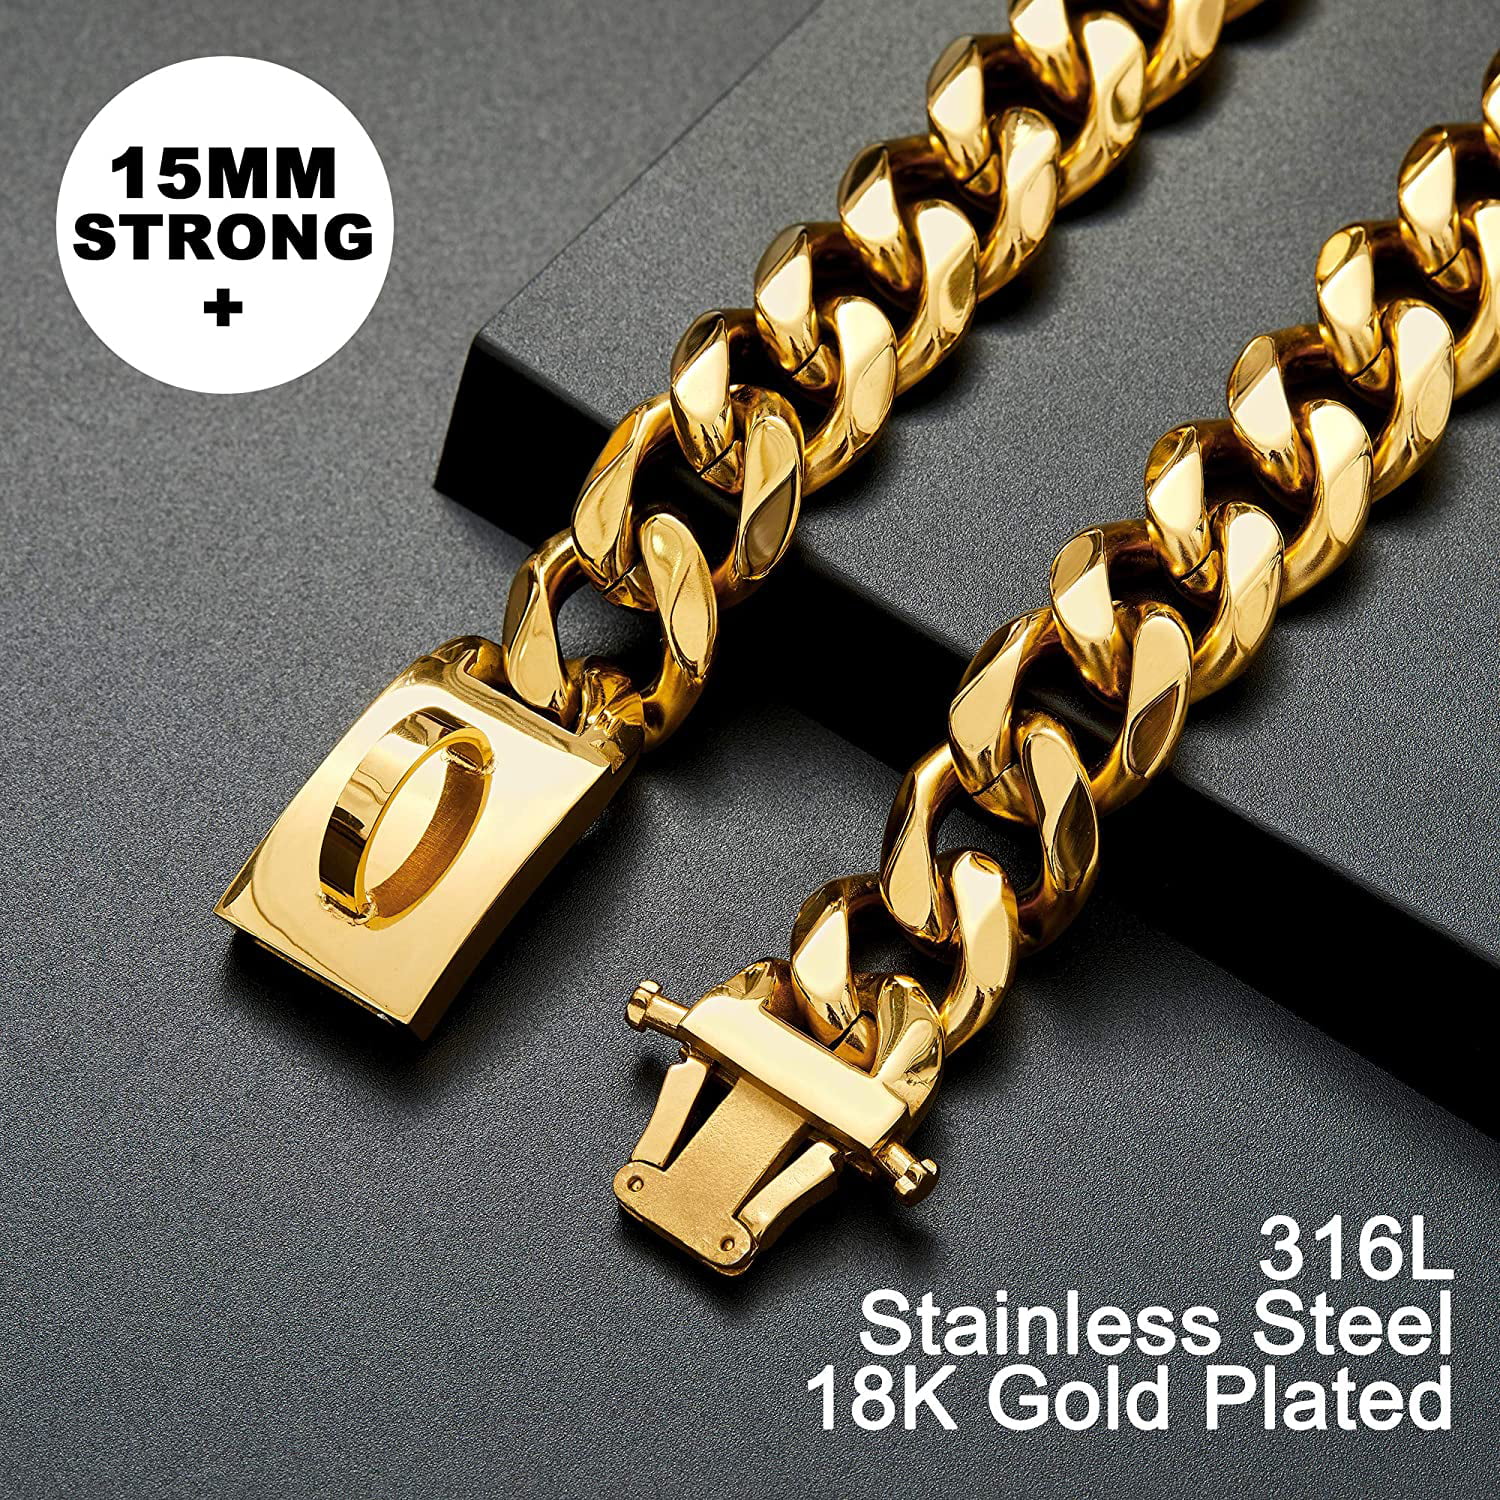 BMusdog Gold Dog Chain Collar Metal Chain with Design Secure Buckle 18K Miami Cuban Link Chain 15MM Strong Heavy Duty Chew Proof Walking Collar for Small Medium Large Dogs 